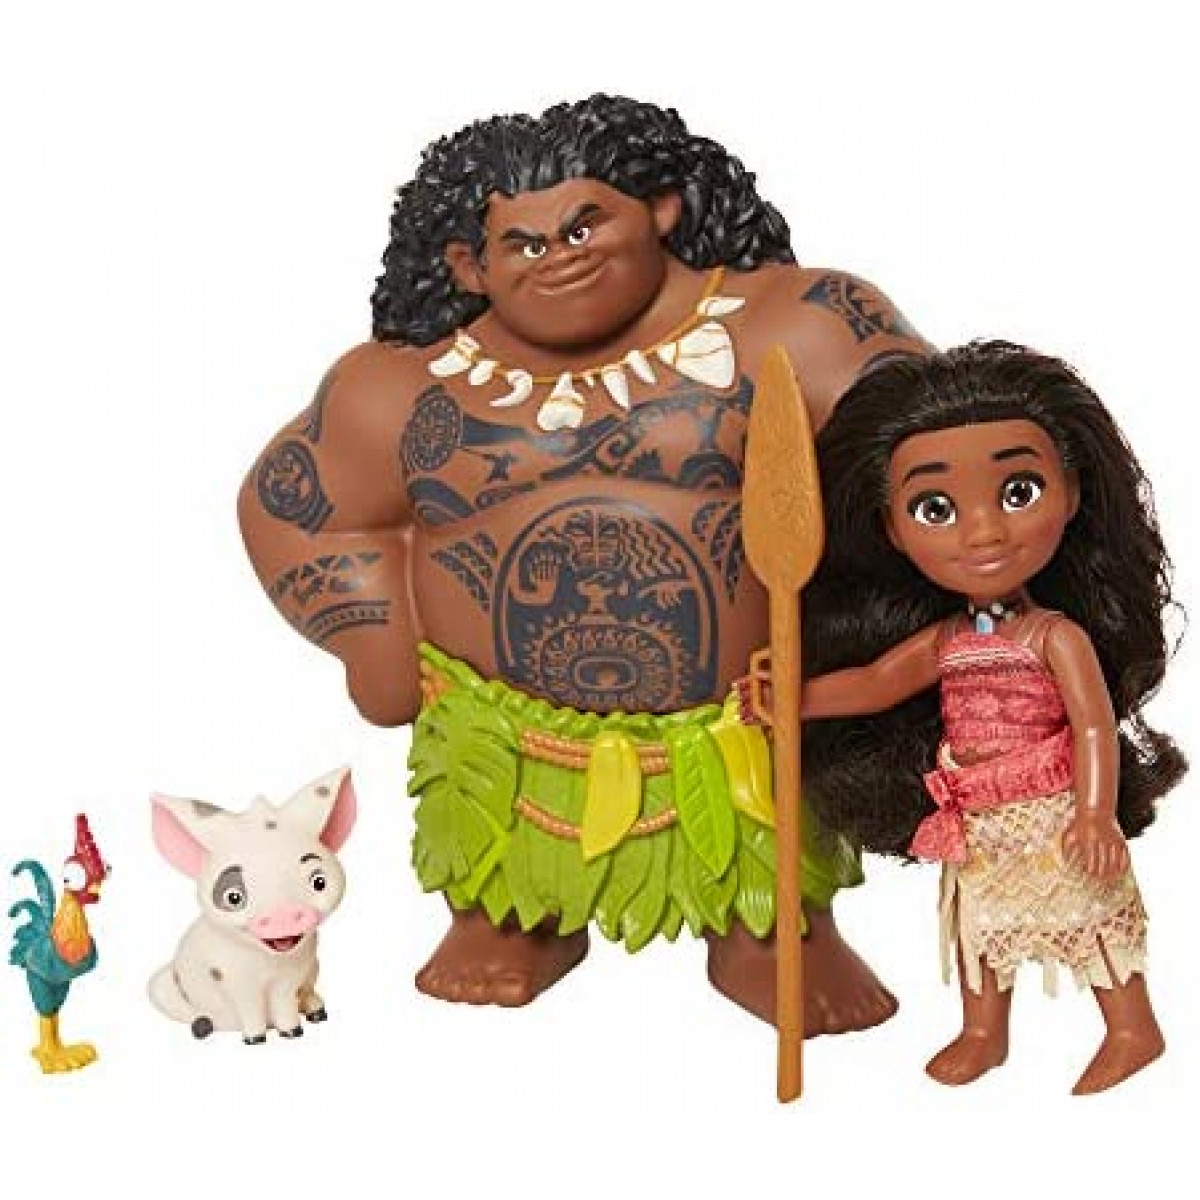 Moana Disney Doll with Maui Demigod Doll Figure, 4 Piece Little Petite  Story Telling Gift Set for Girls Ages 3 and Up